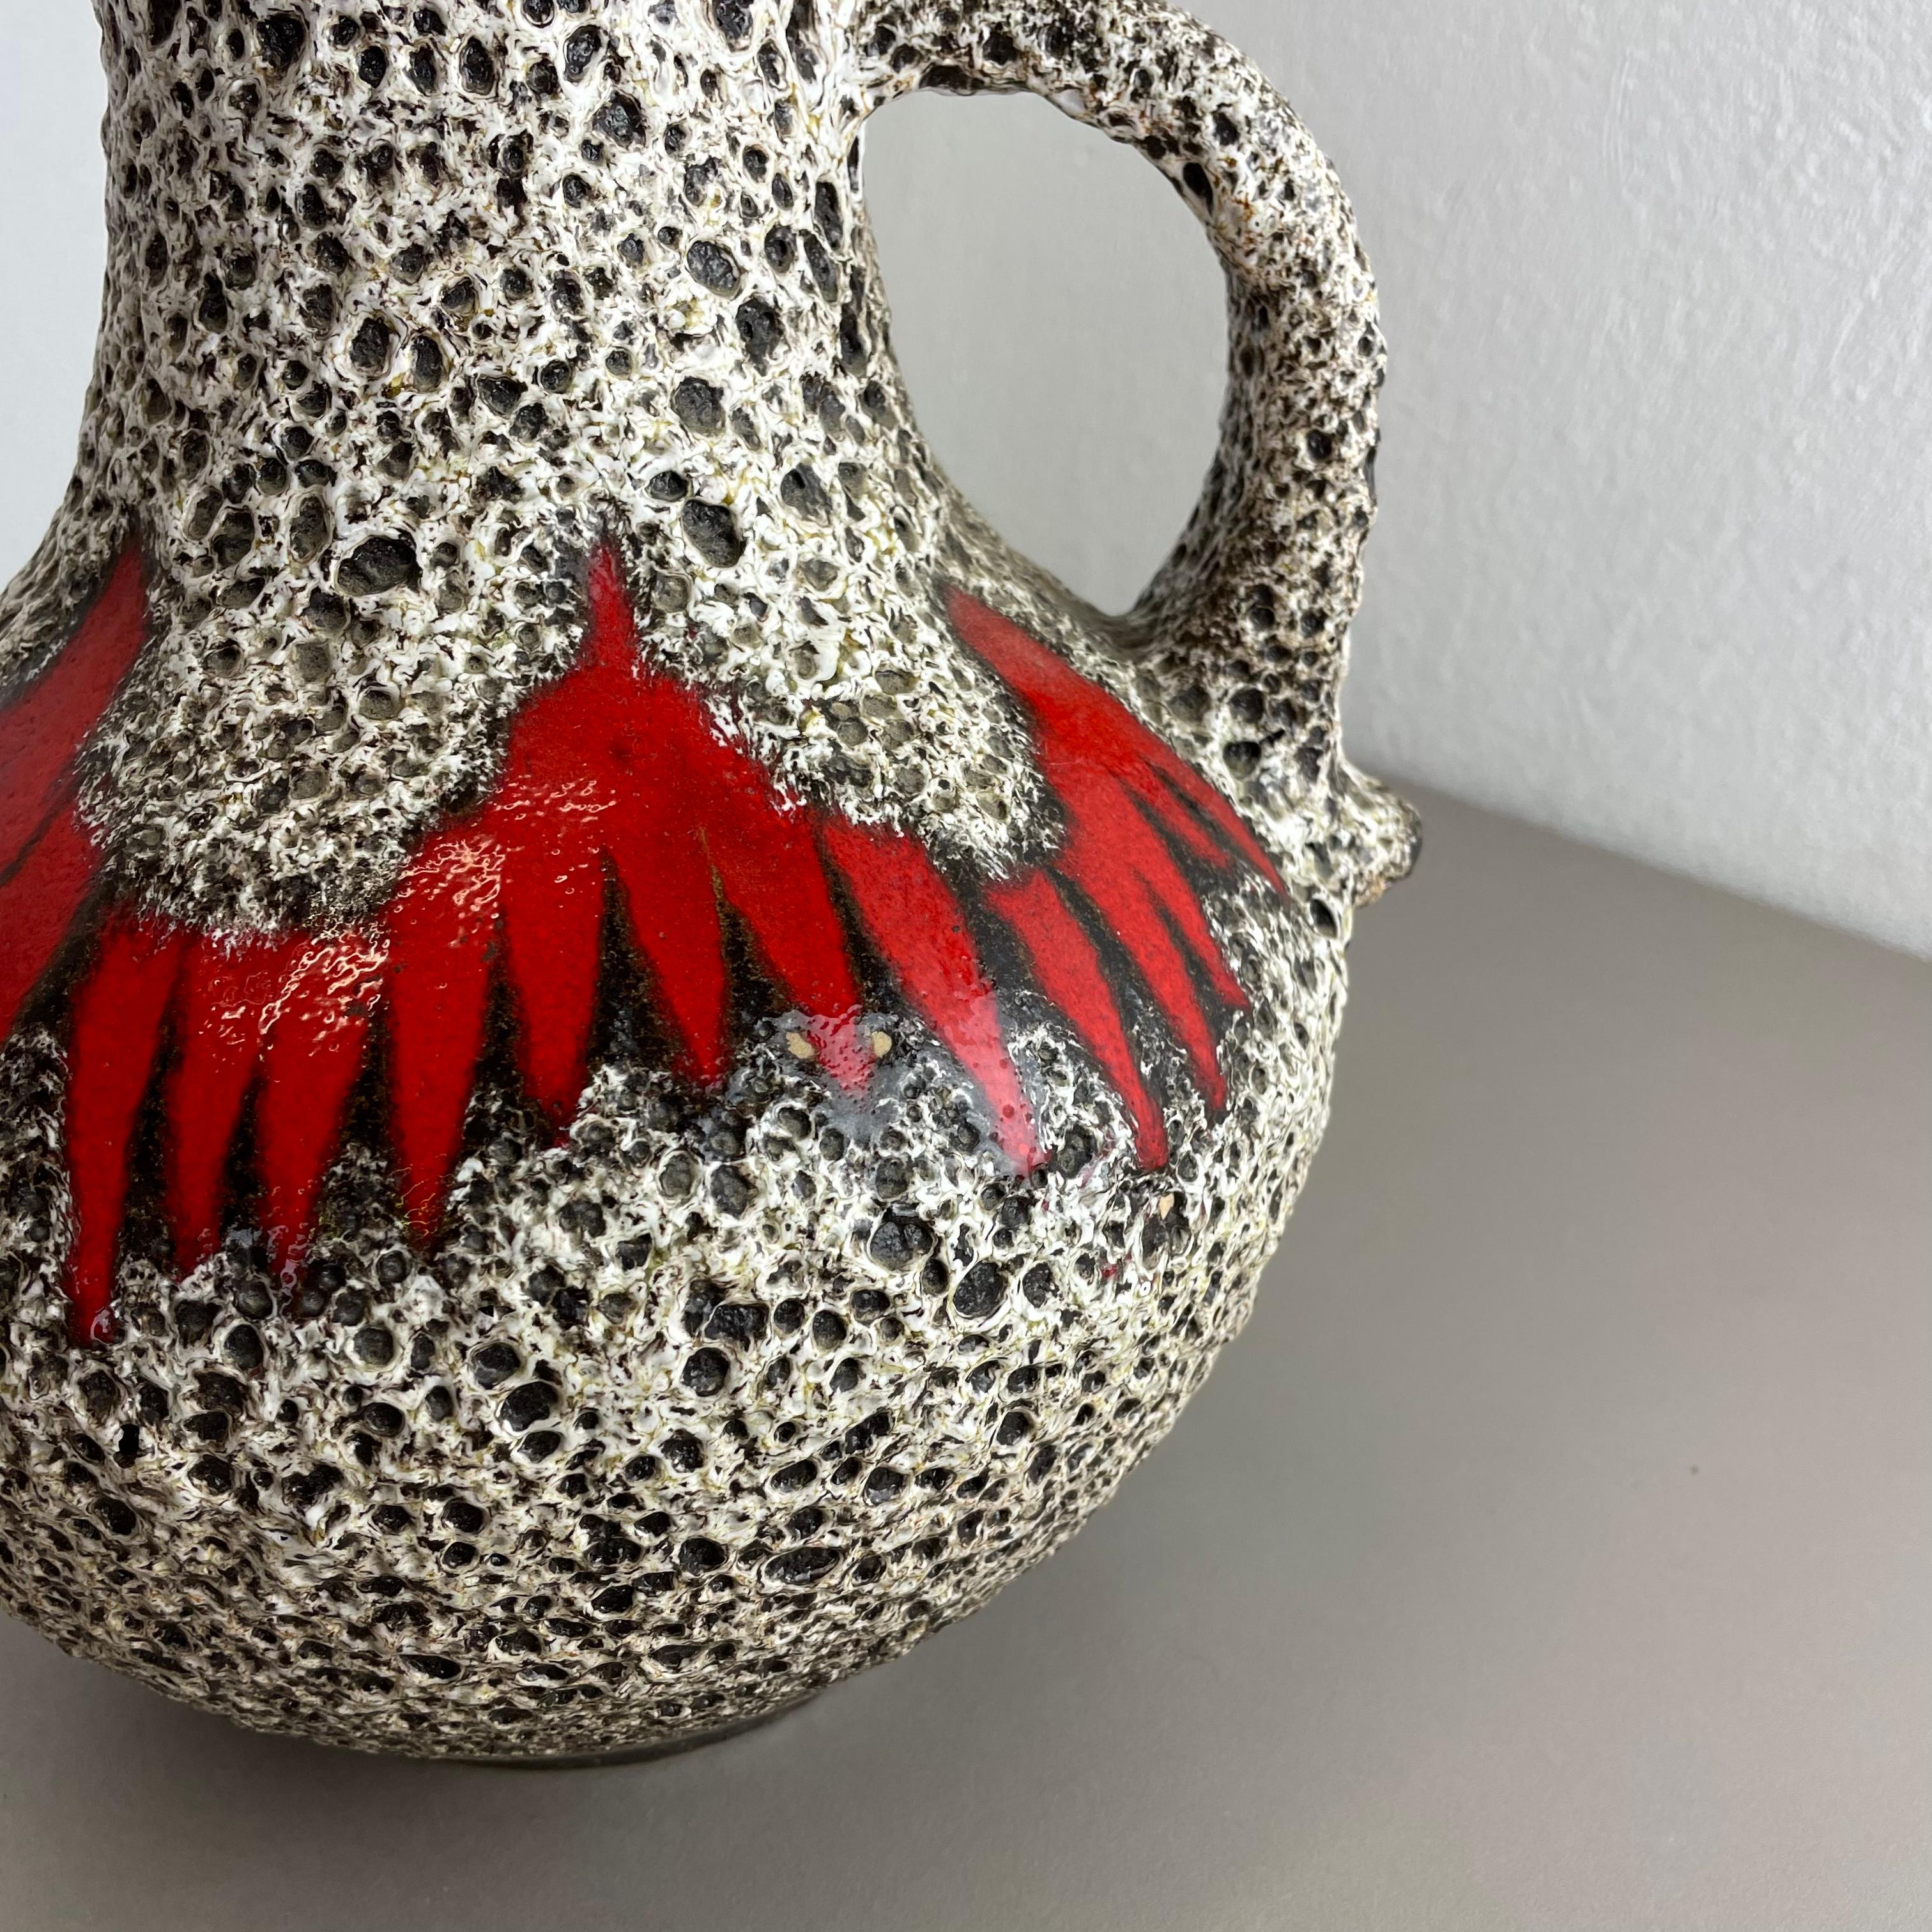 Mid-Century Modern Extraordinary Zig Zag Pottery Fat Lava Vase Made by Scheurich, Germany, 1970s For Sale